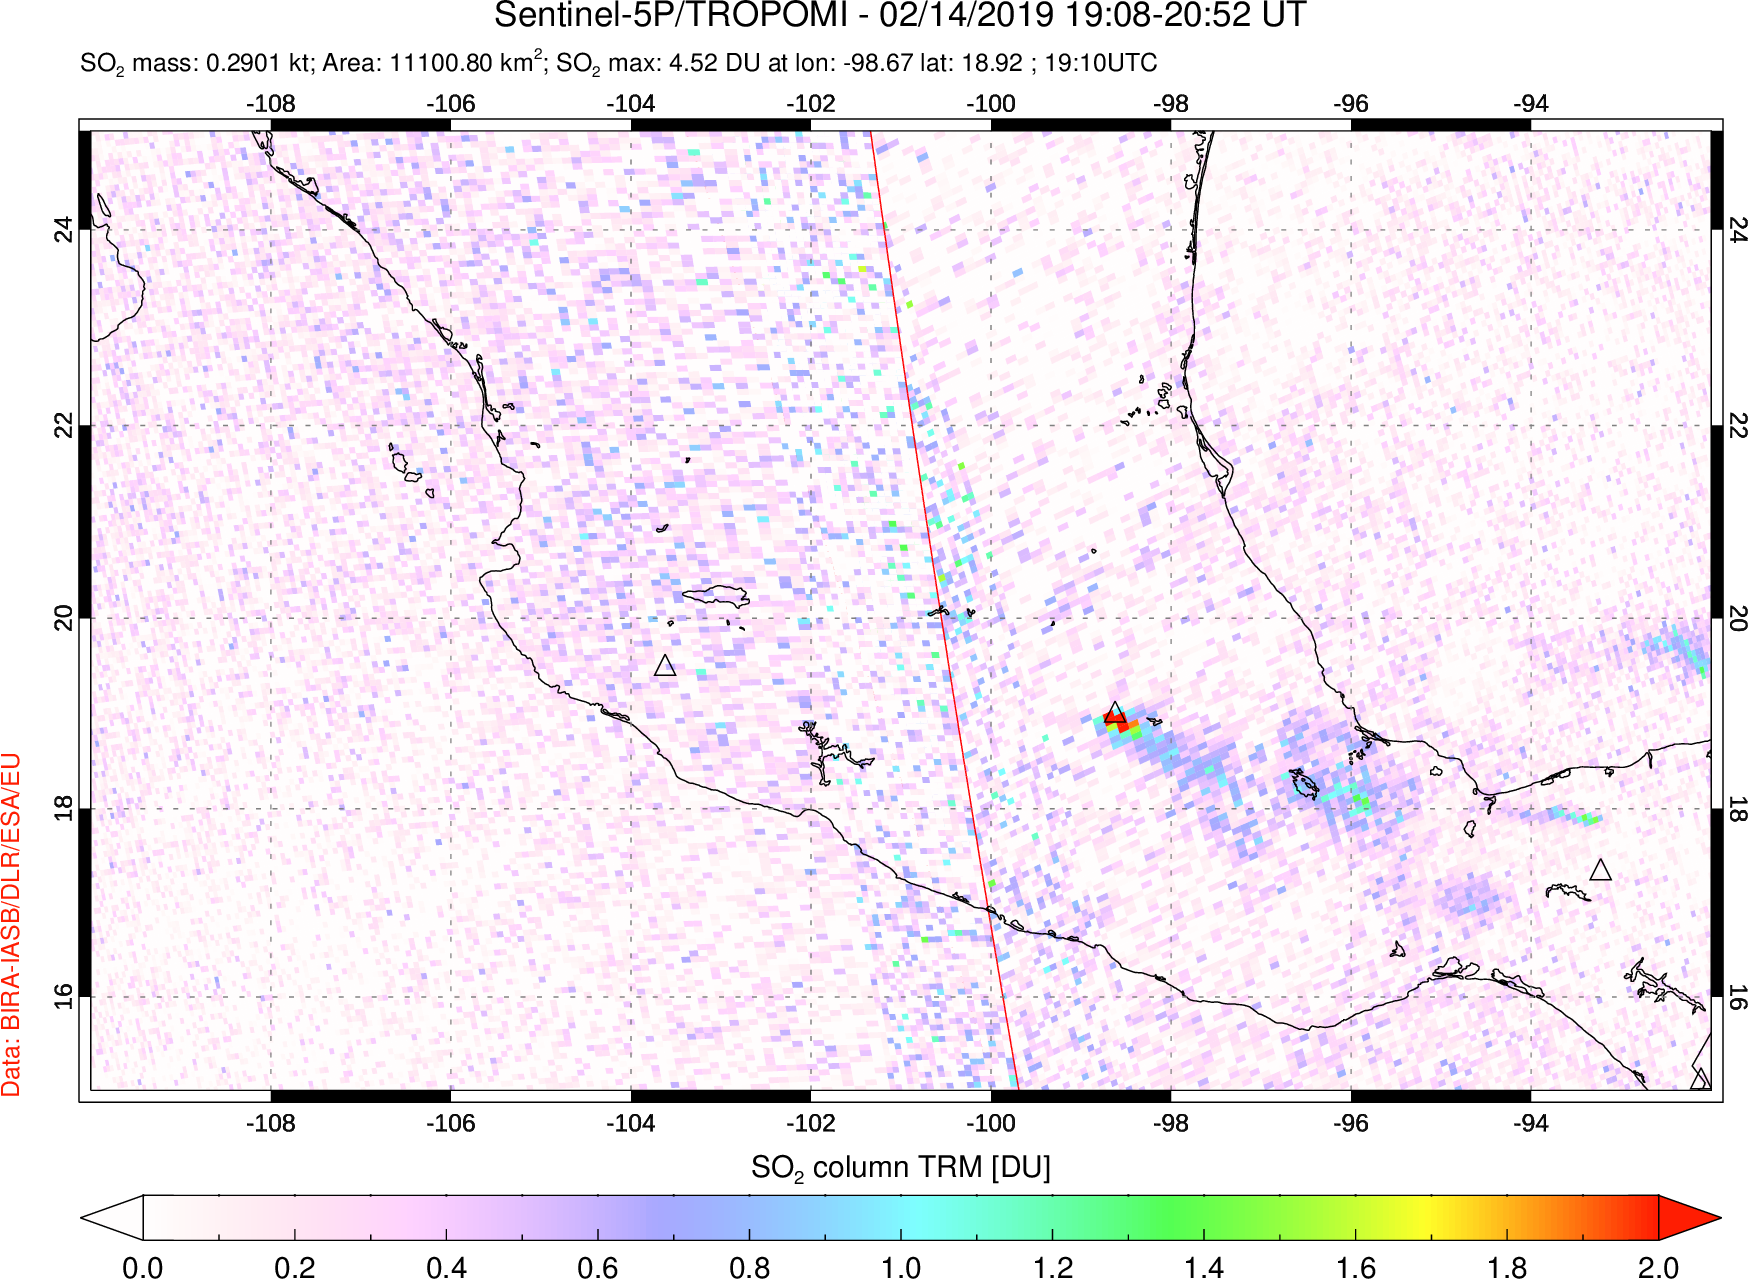 A sulfur dioxide image over Mexico on Feb 14, 2019.